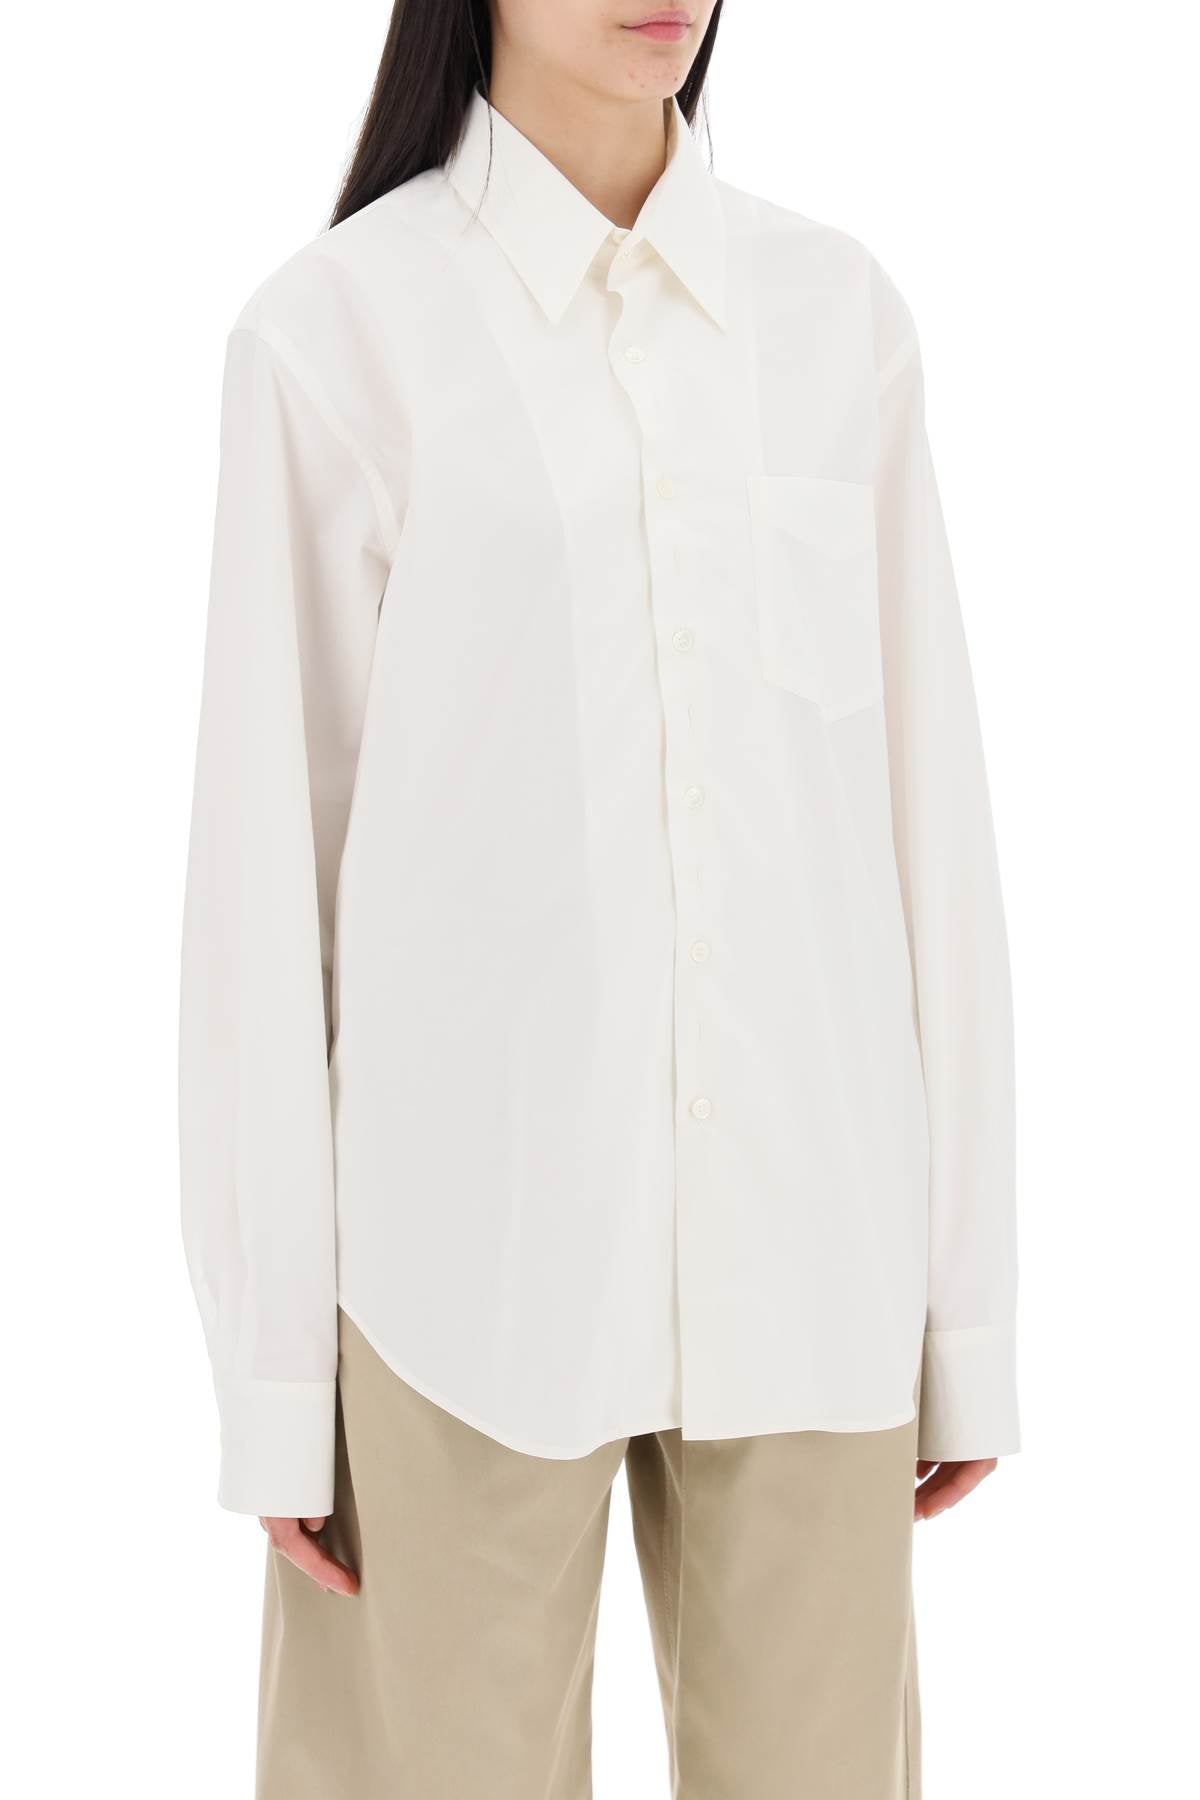 Mm6 Maison Margiela Cut Out Shirt With Open   White